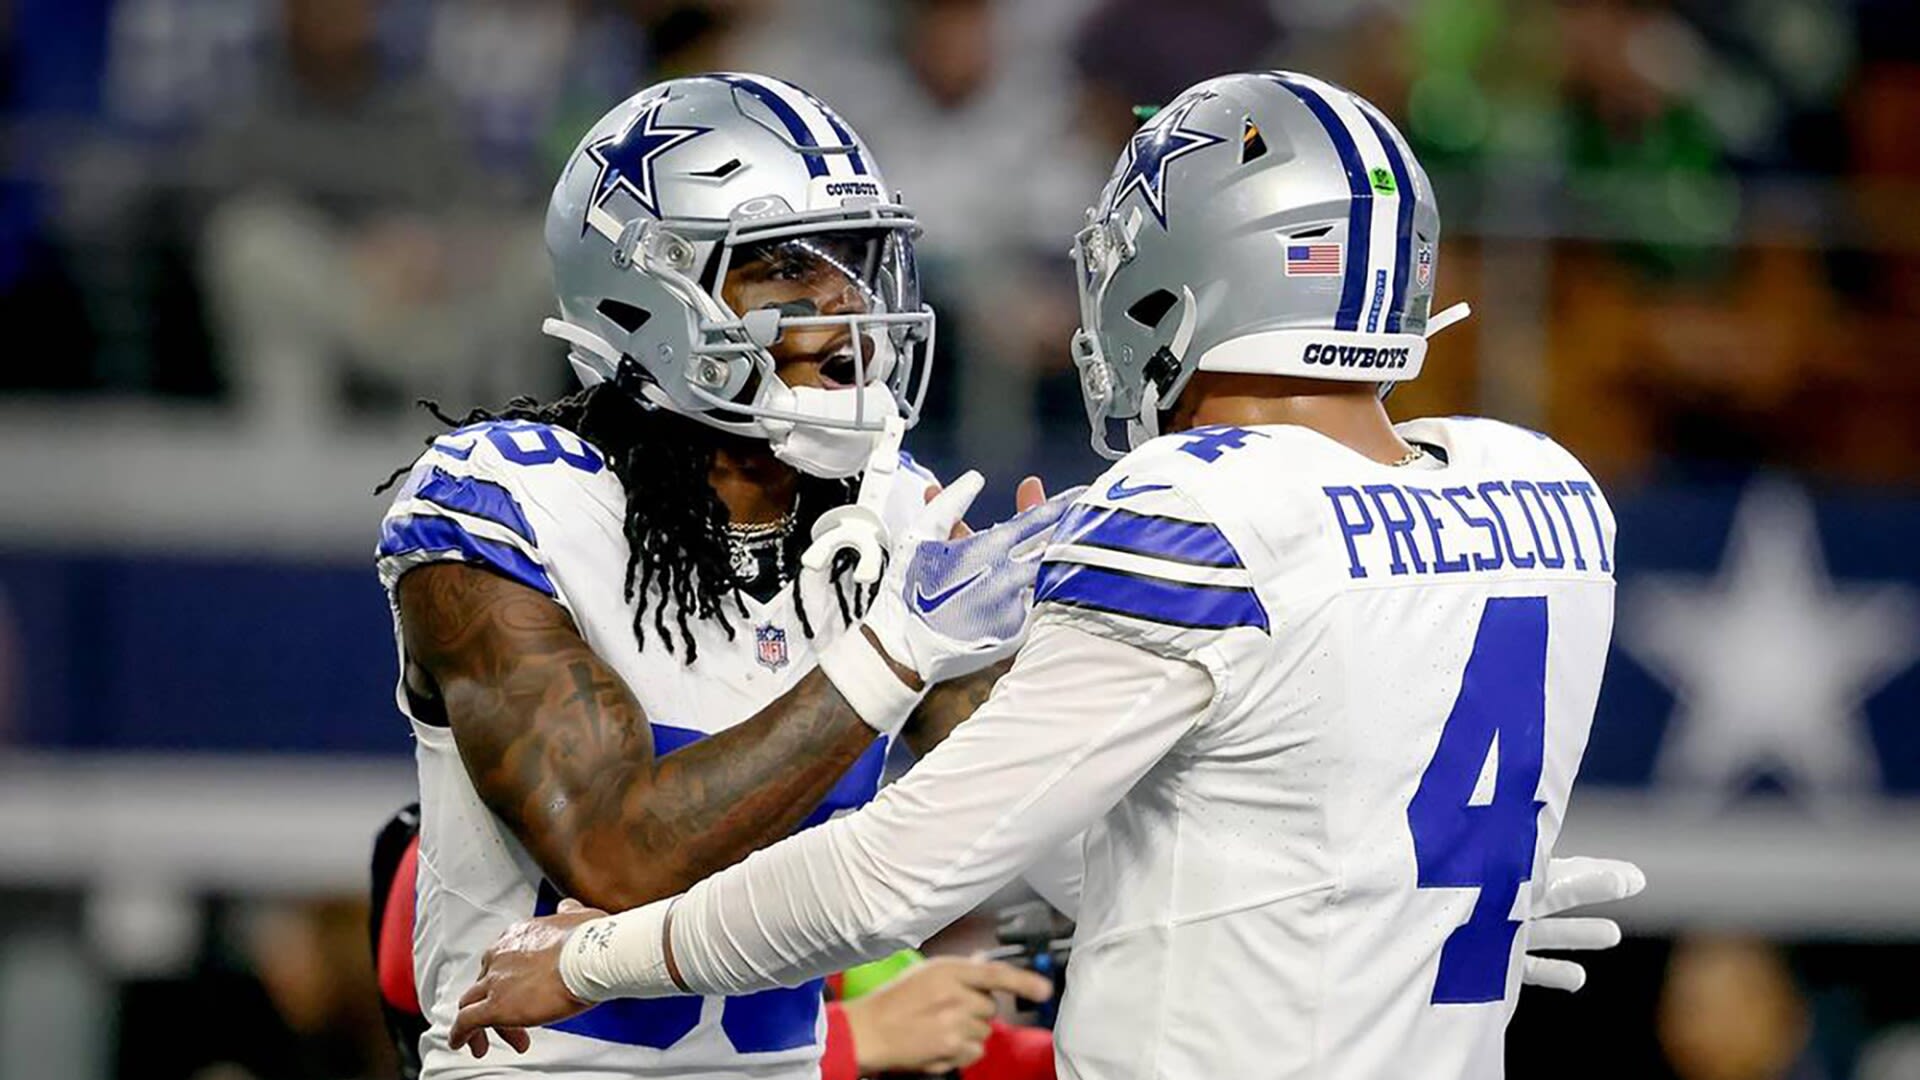 Dak Prescott: CeeDee Lamb is going to be ready to play when the time comes